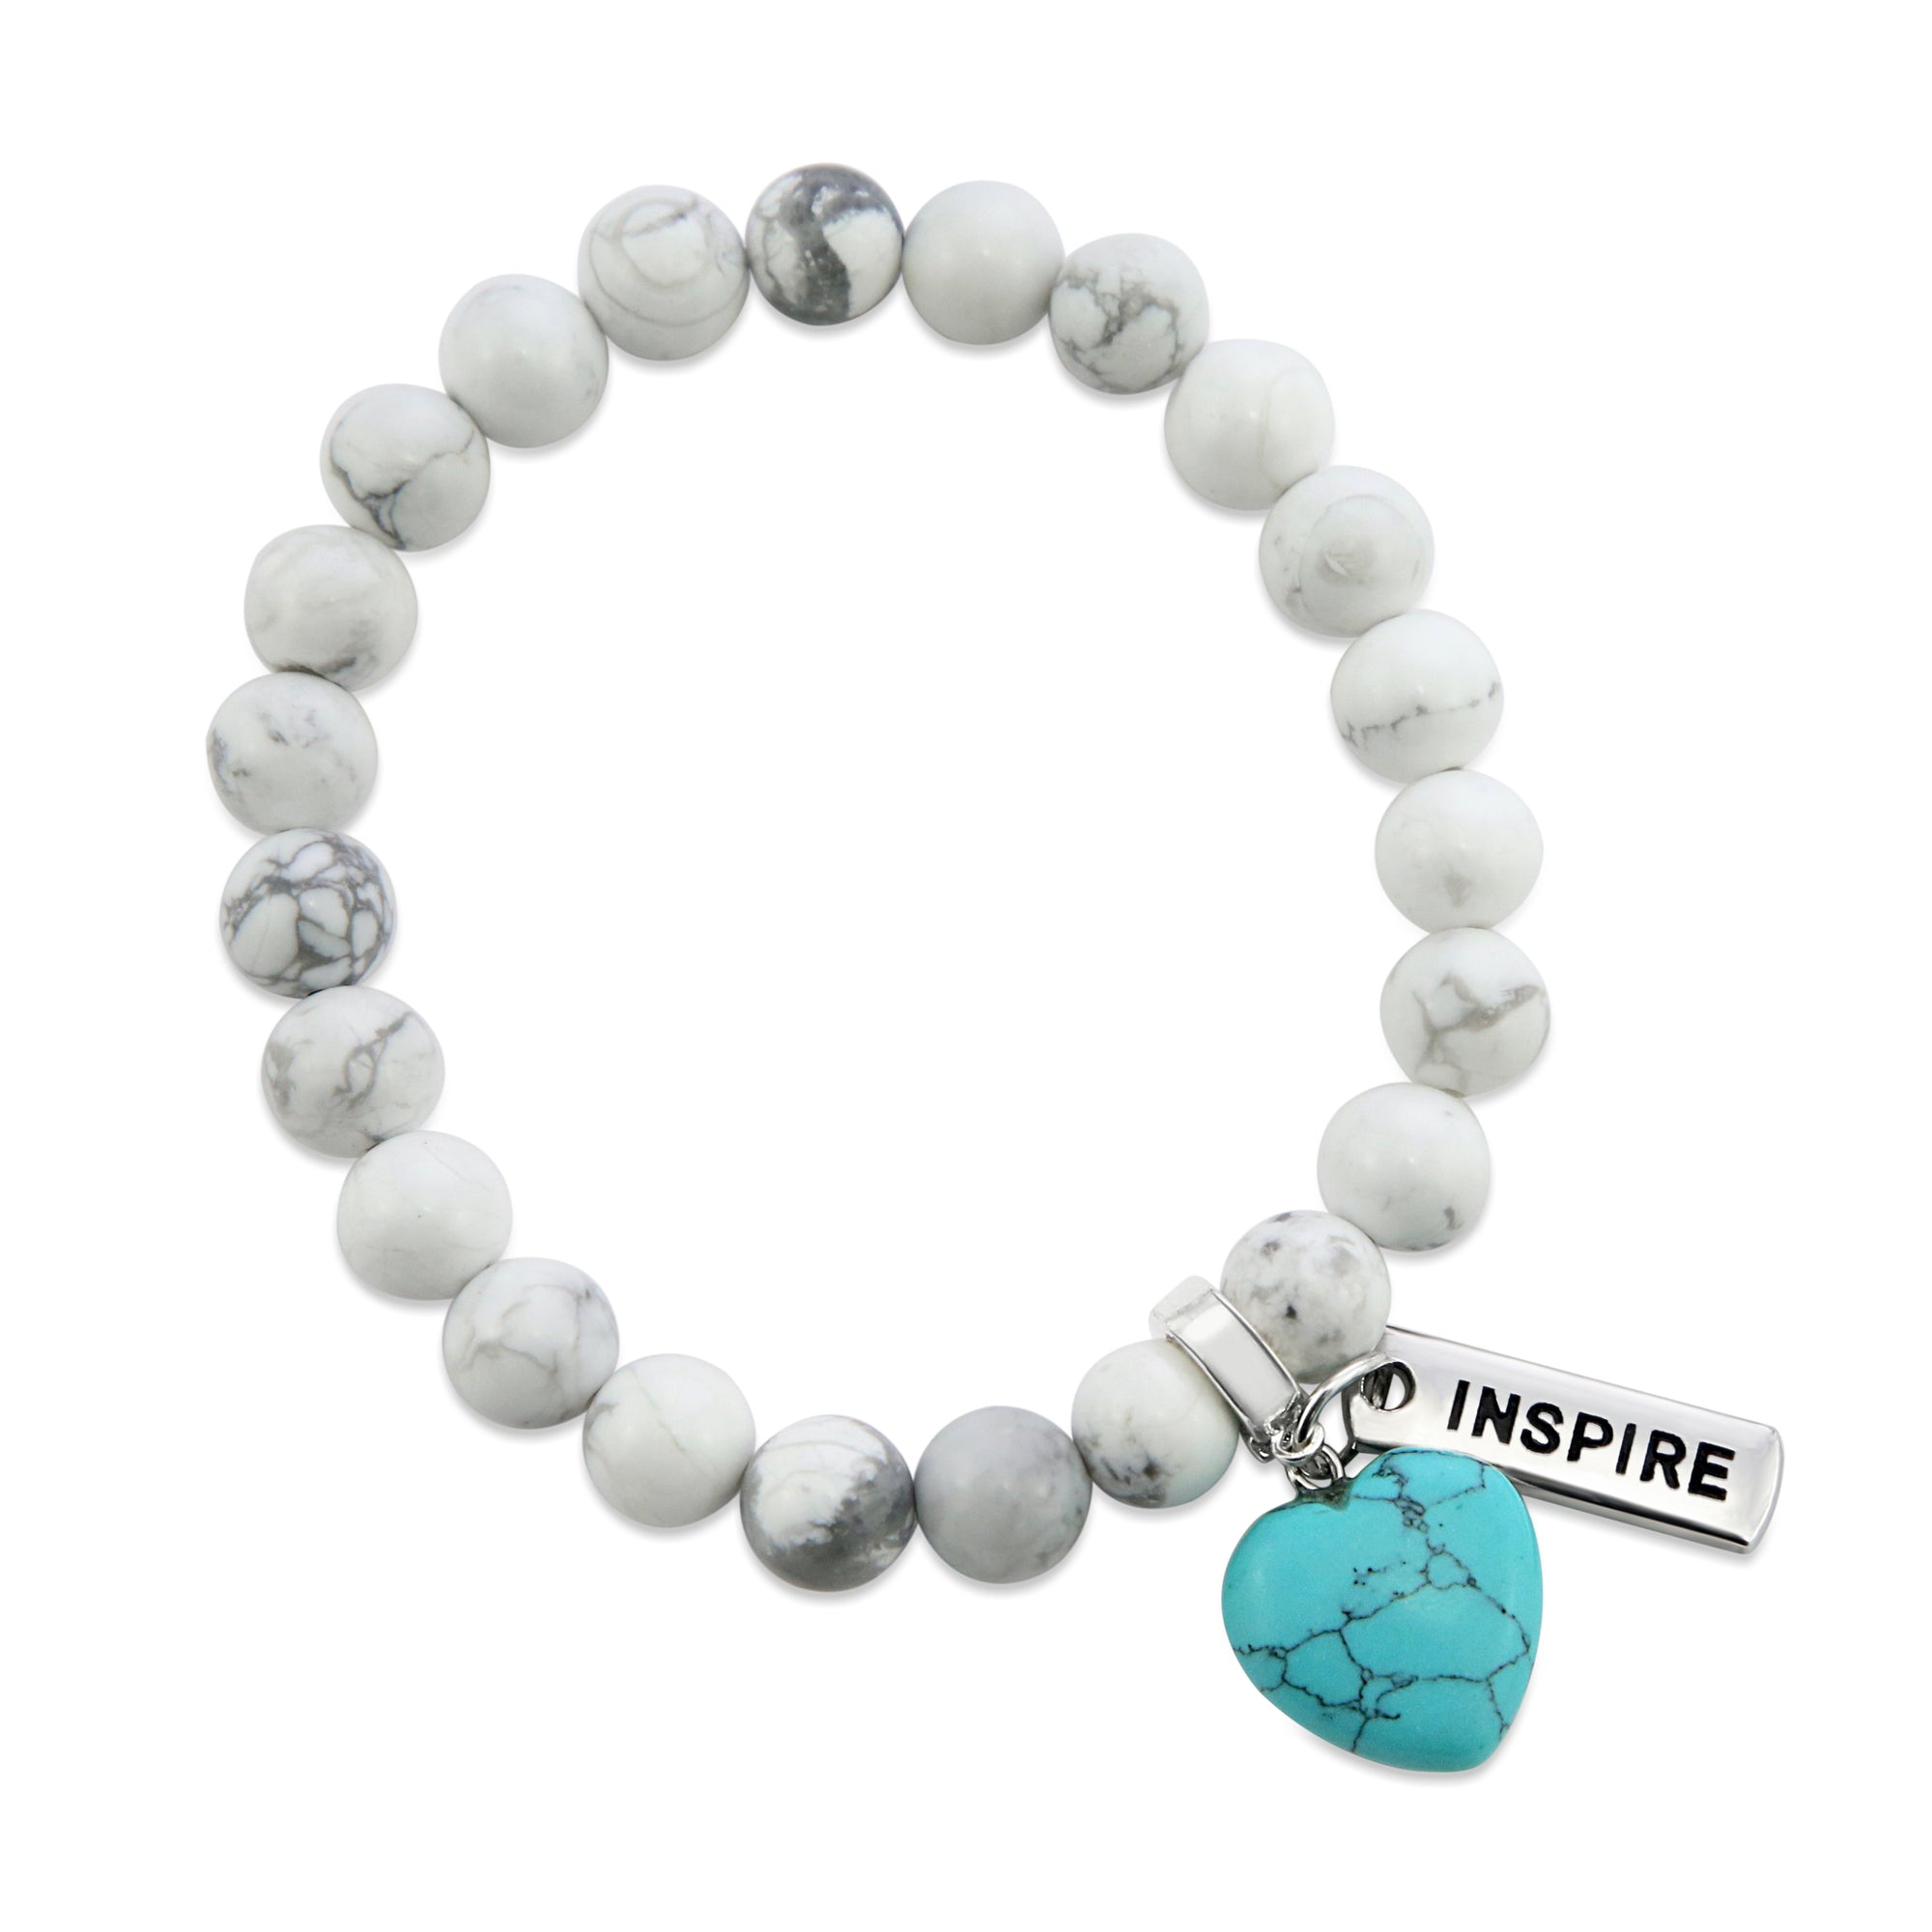 White marble howlite stone bracelet with turquoise stone heart shaped charm and inspiring word charm